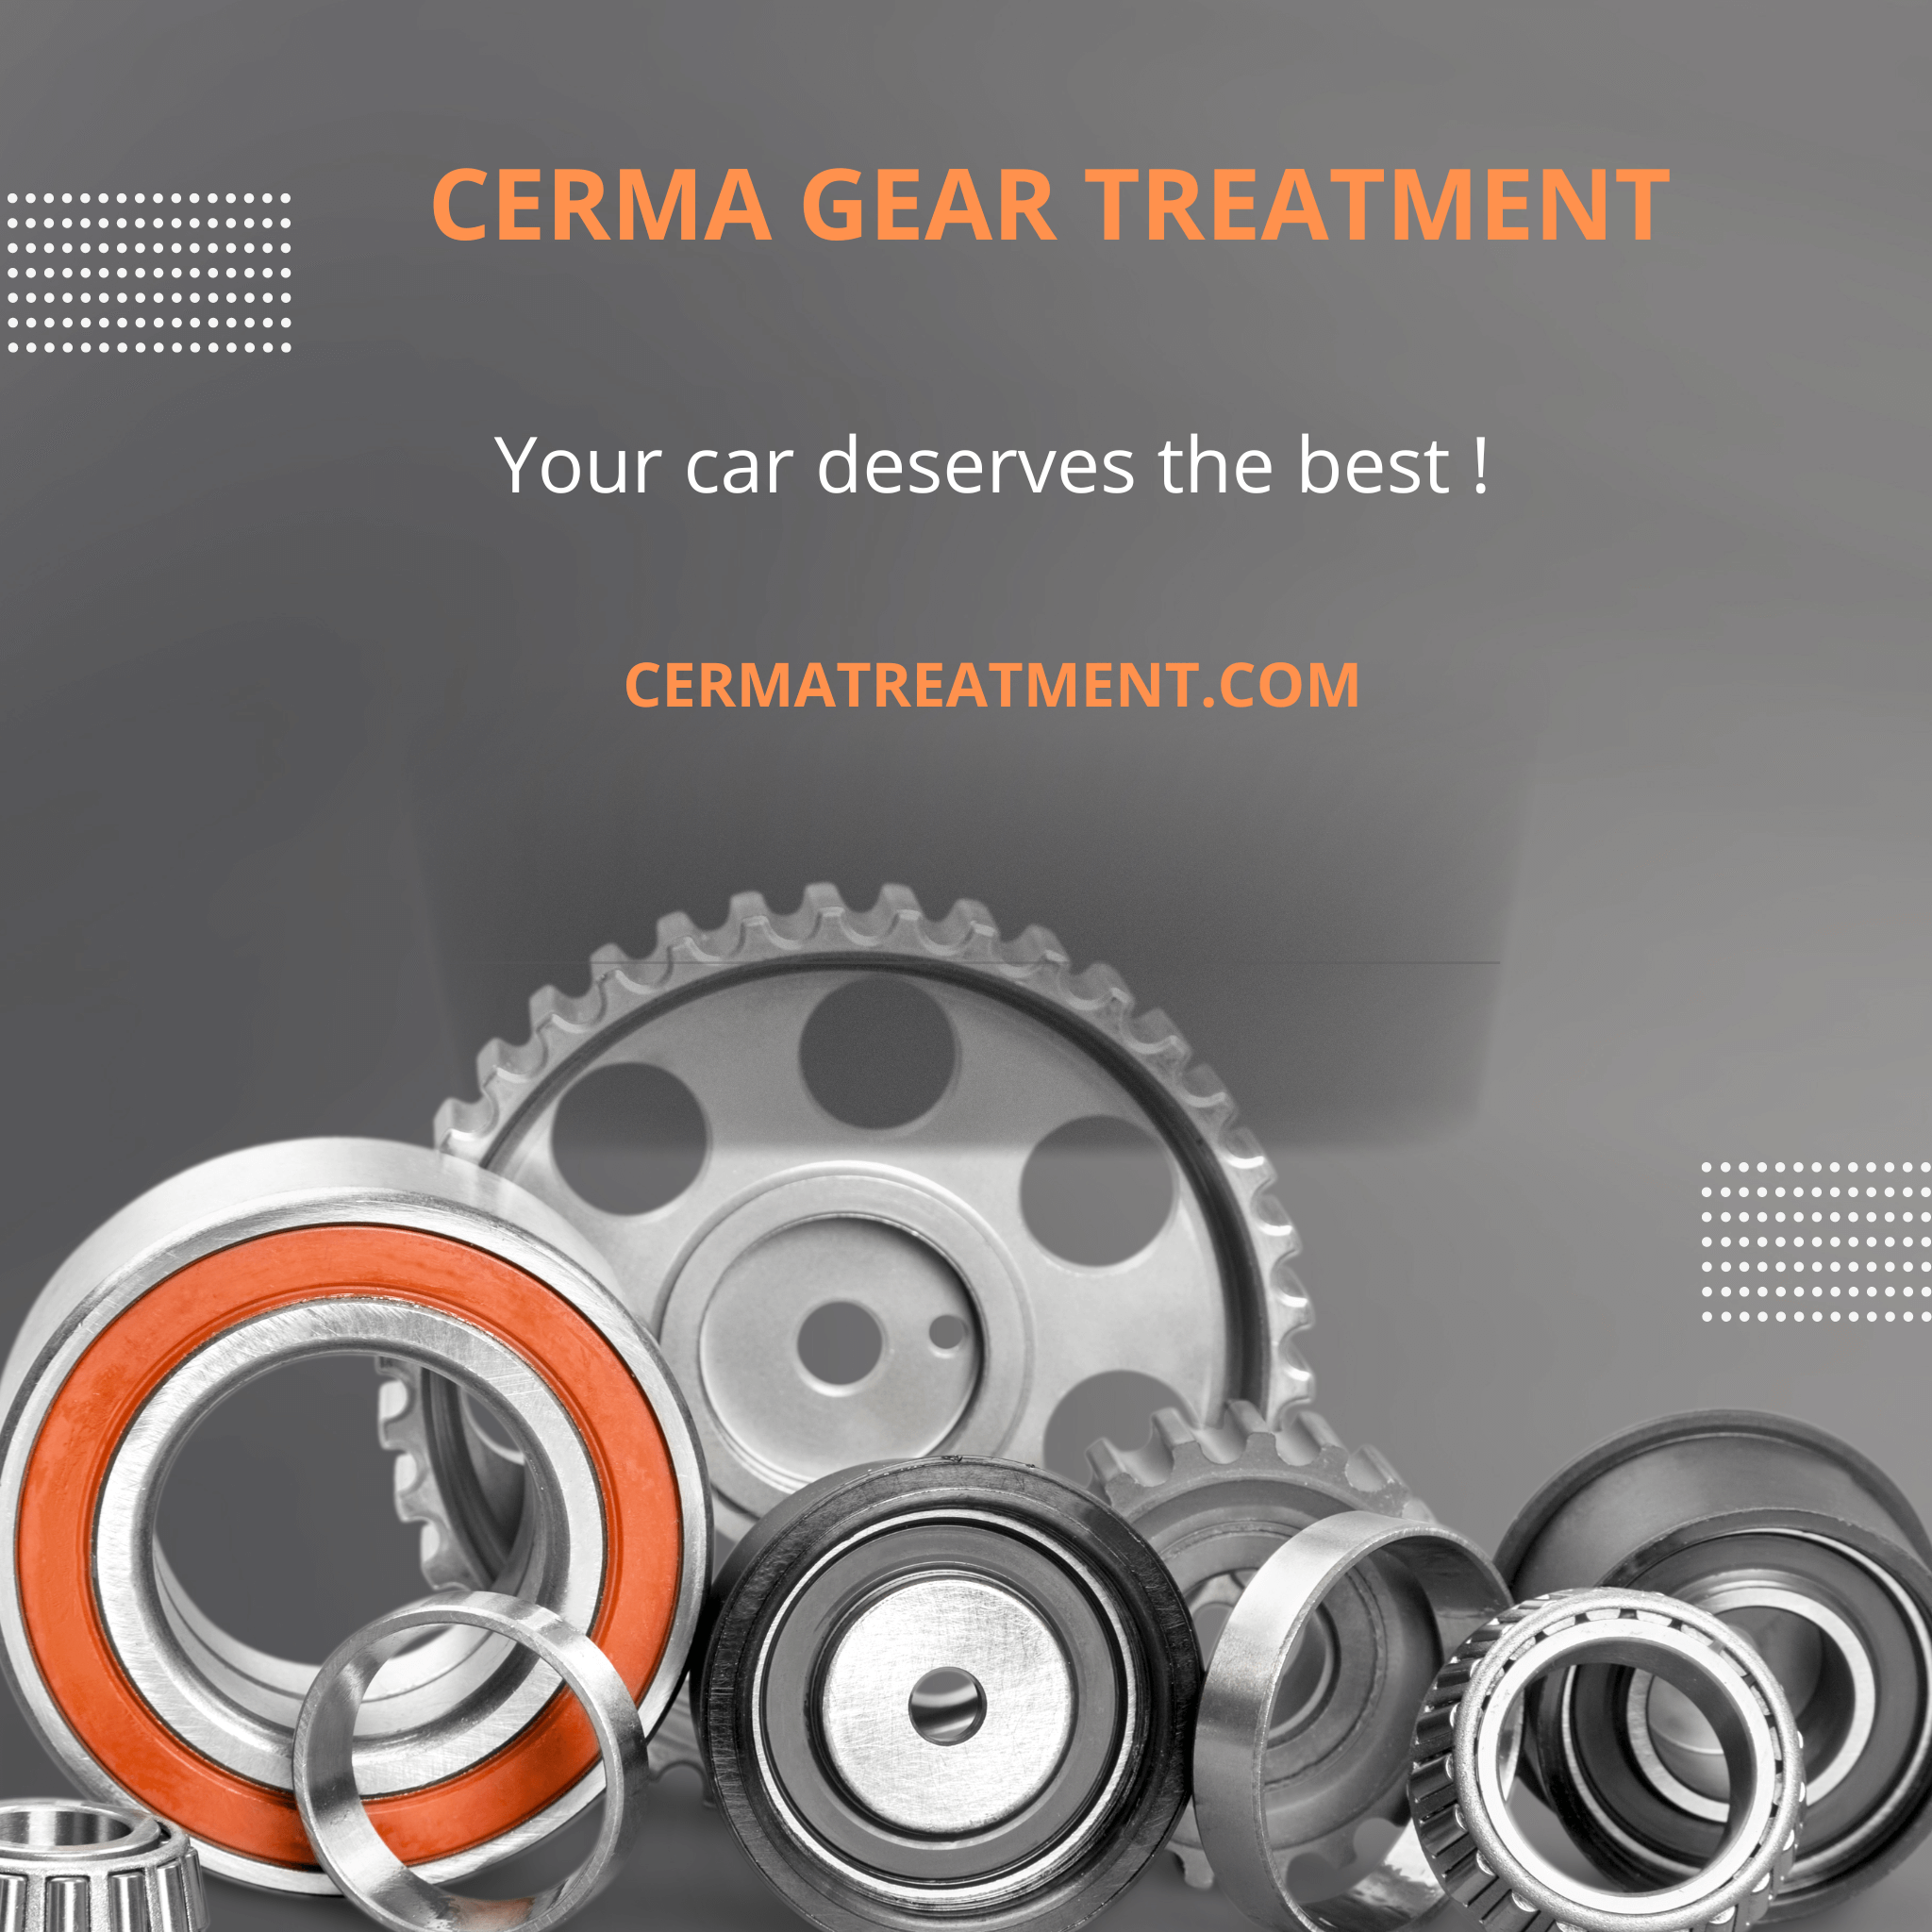 Gearbox: Enhancing Performance and Durability with Cerma Treatment